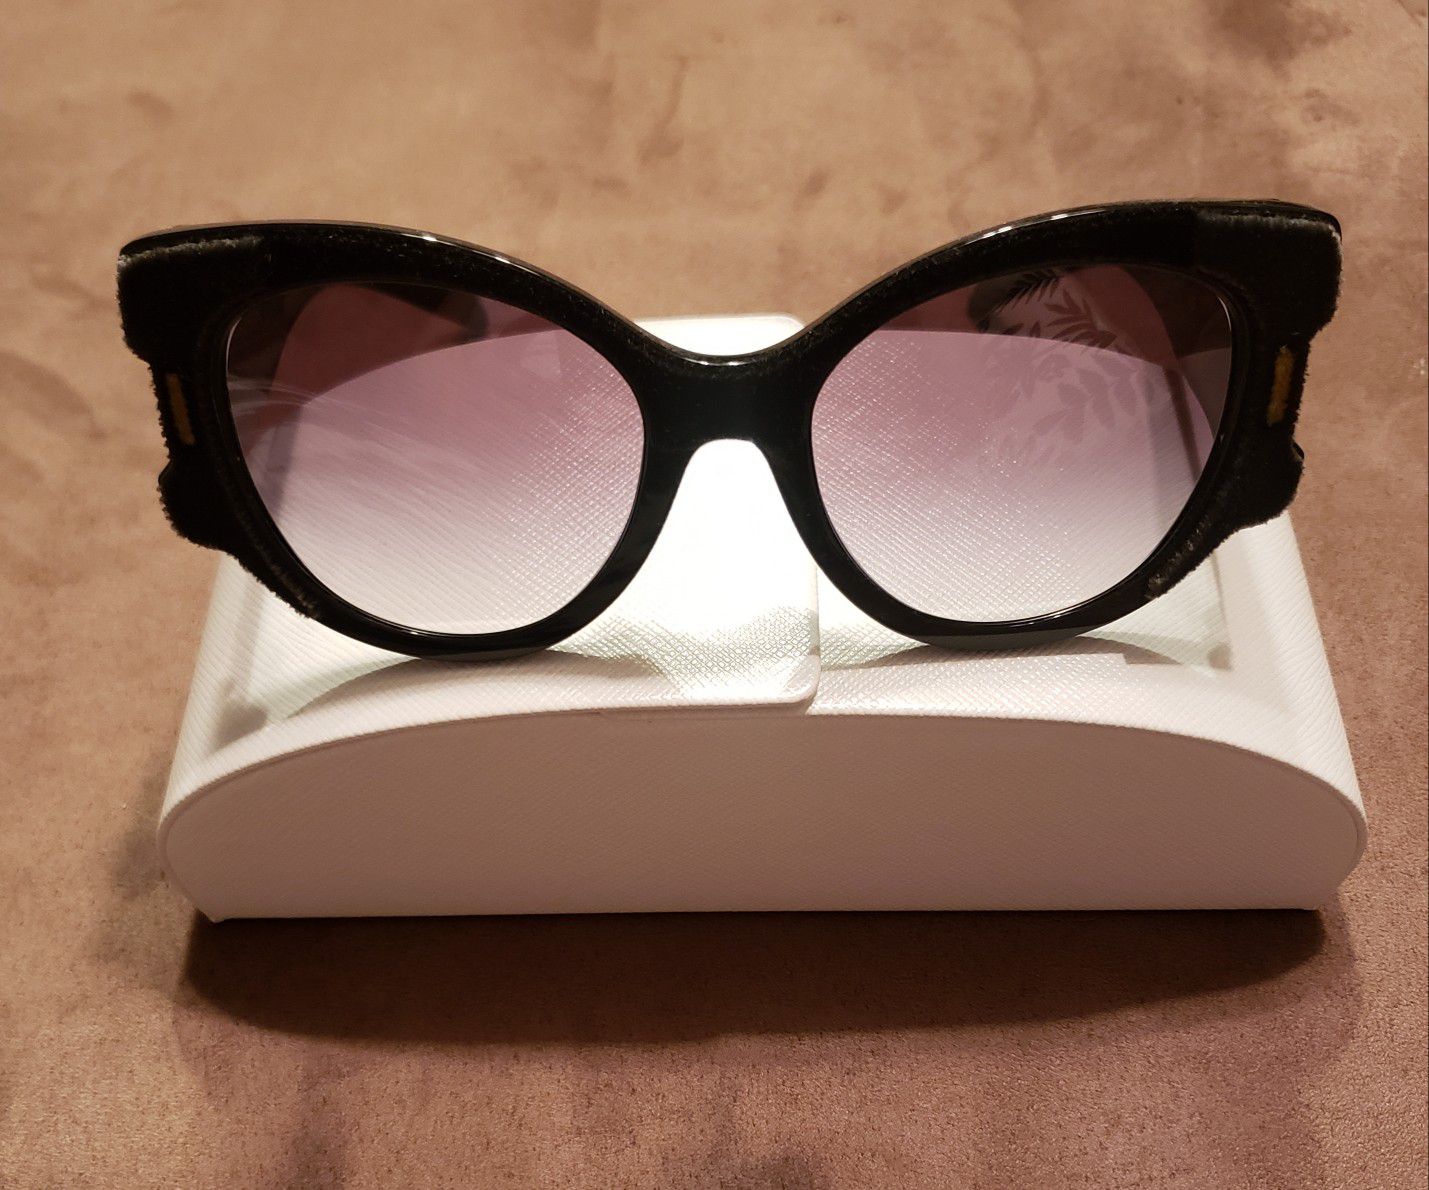 Authentic Prada Sunglasses Brand New in Box With Bag and Dust Cloth